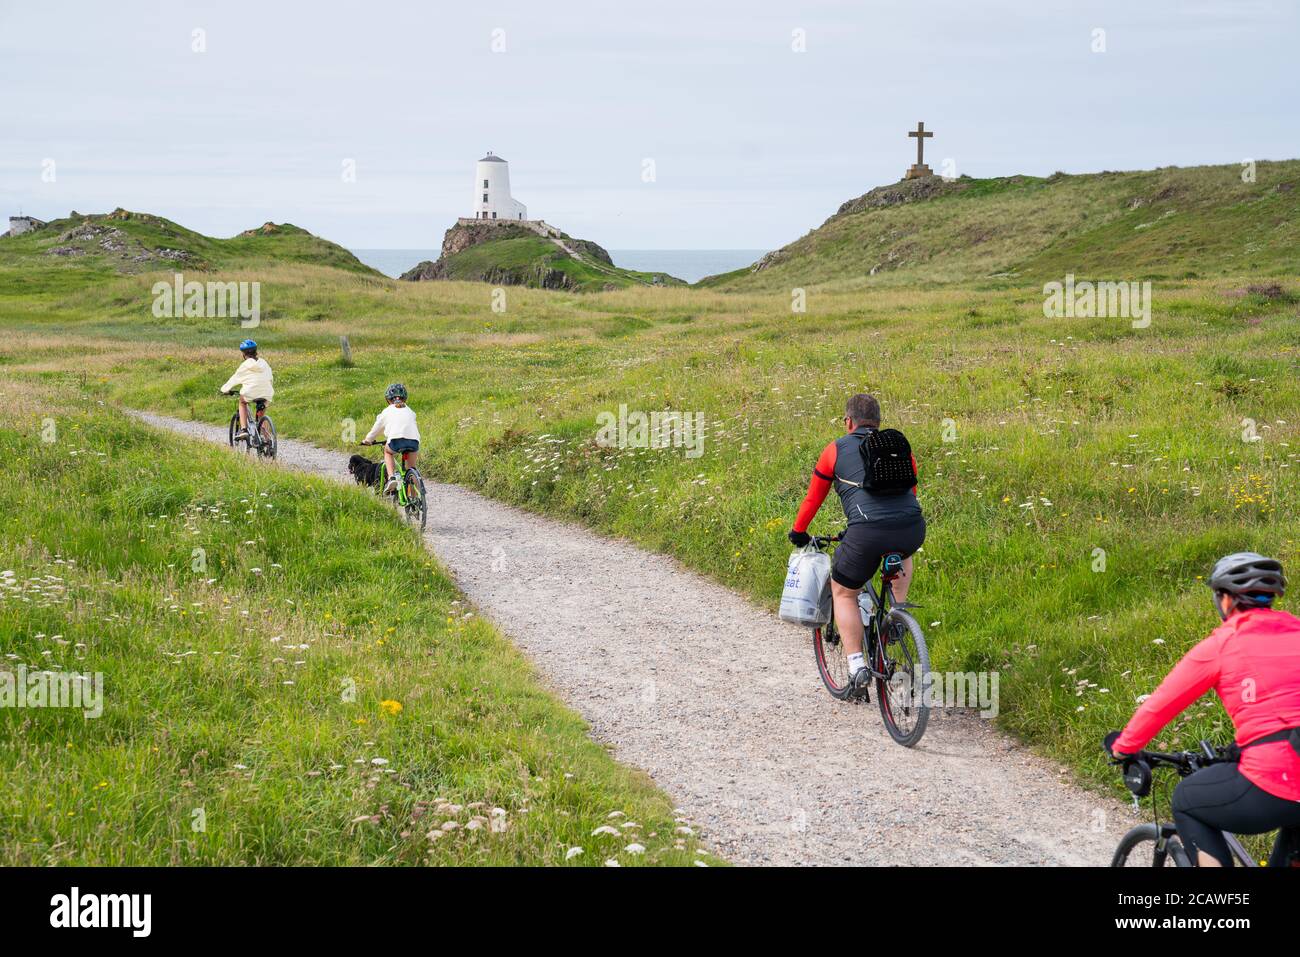 A general view of Twr Mawr lighthouse on Llanddwyn Island on the isle of Anglesey in north Wales. Stock Photo